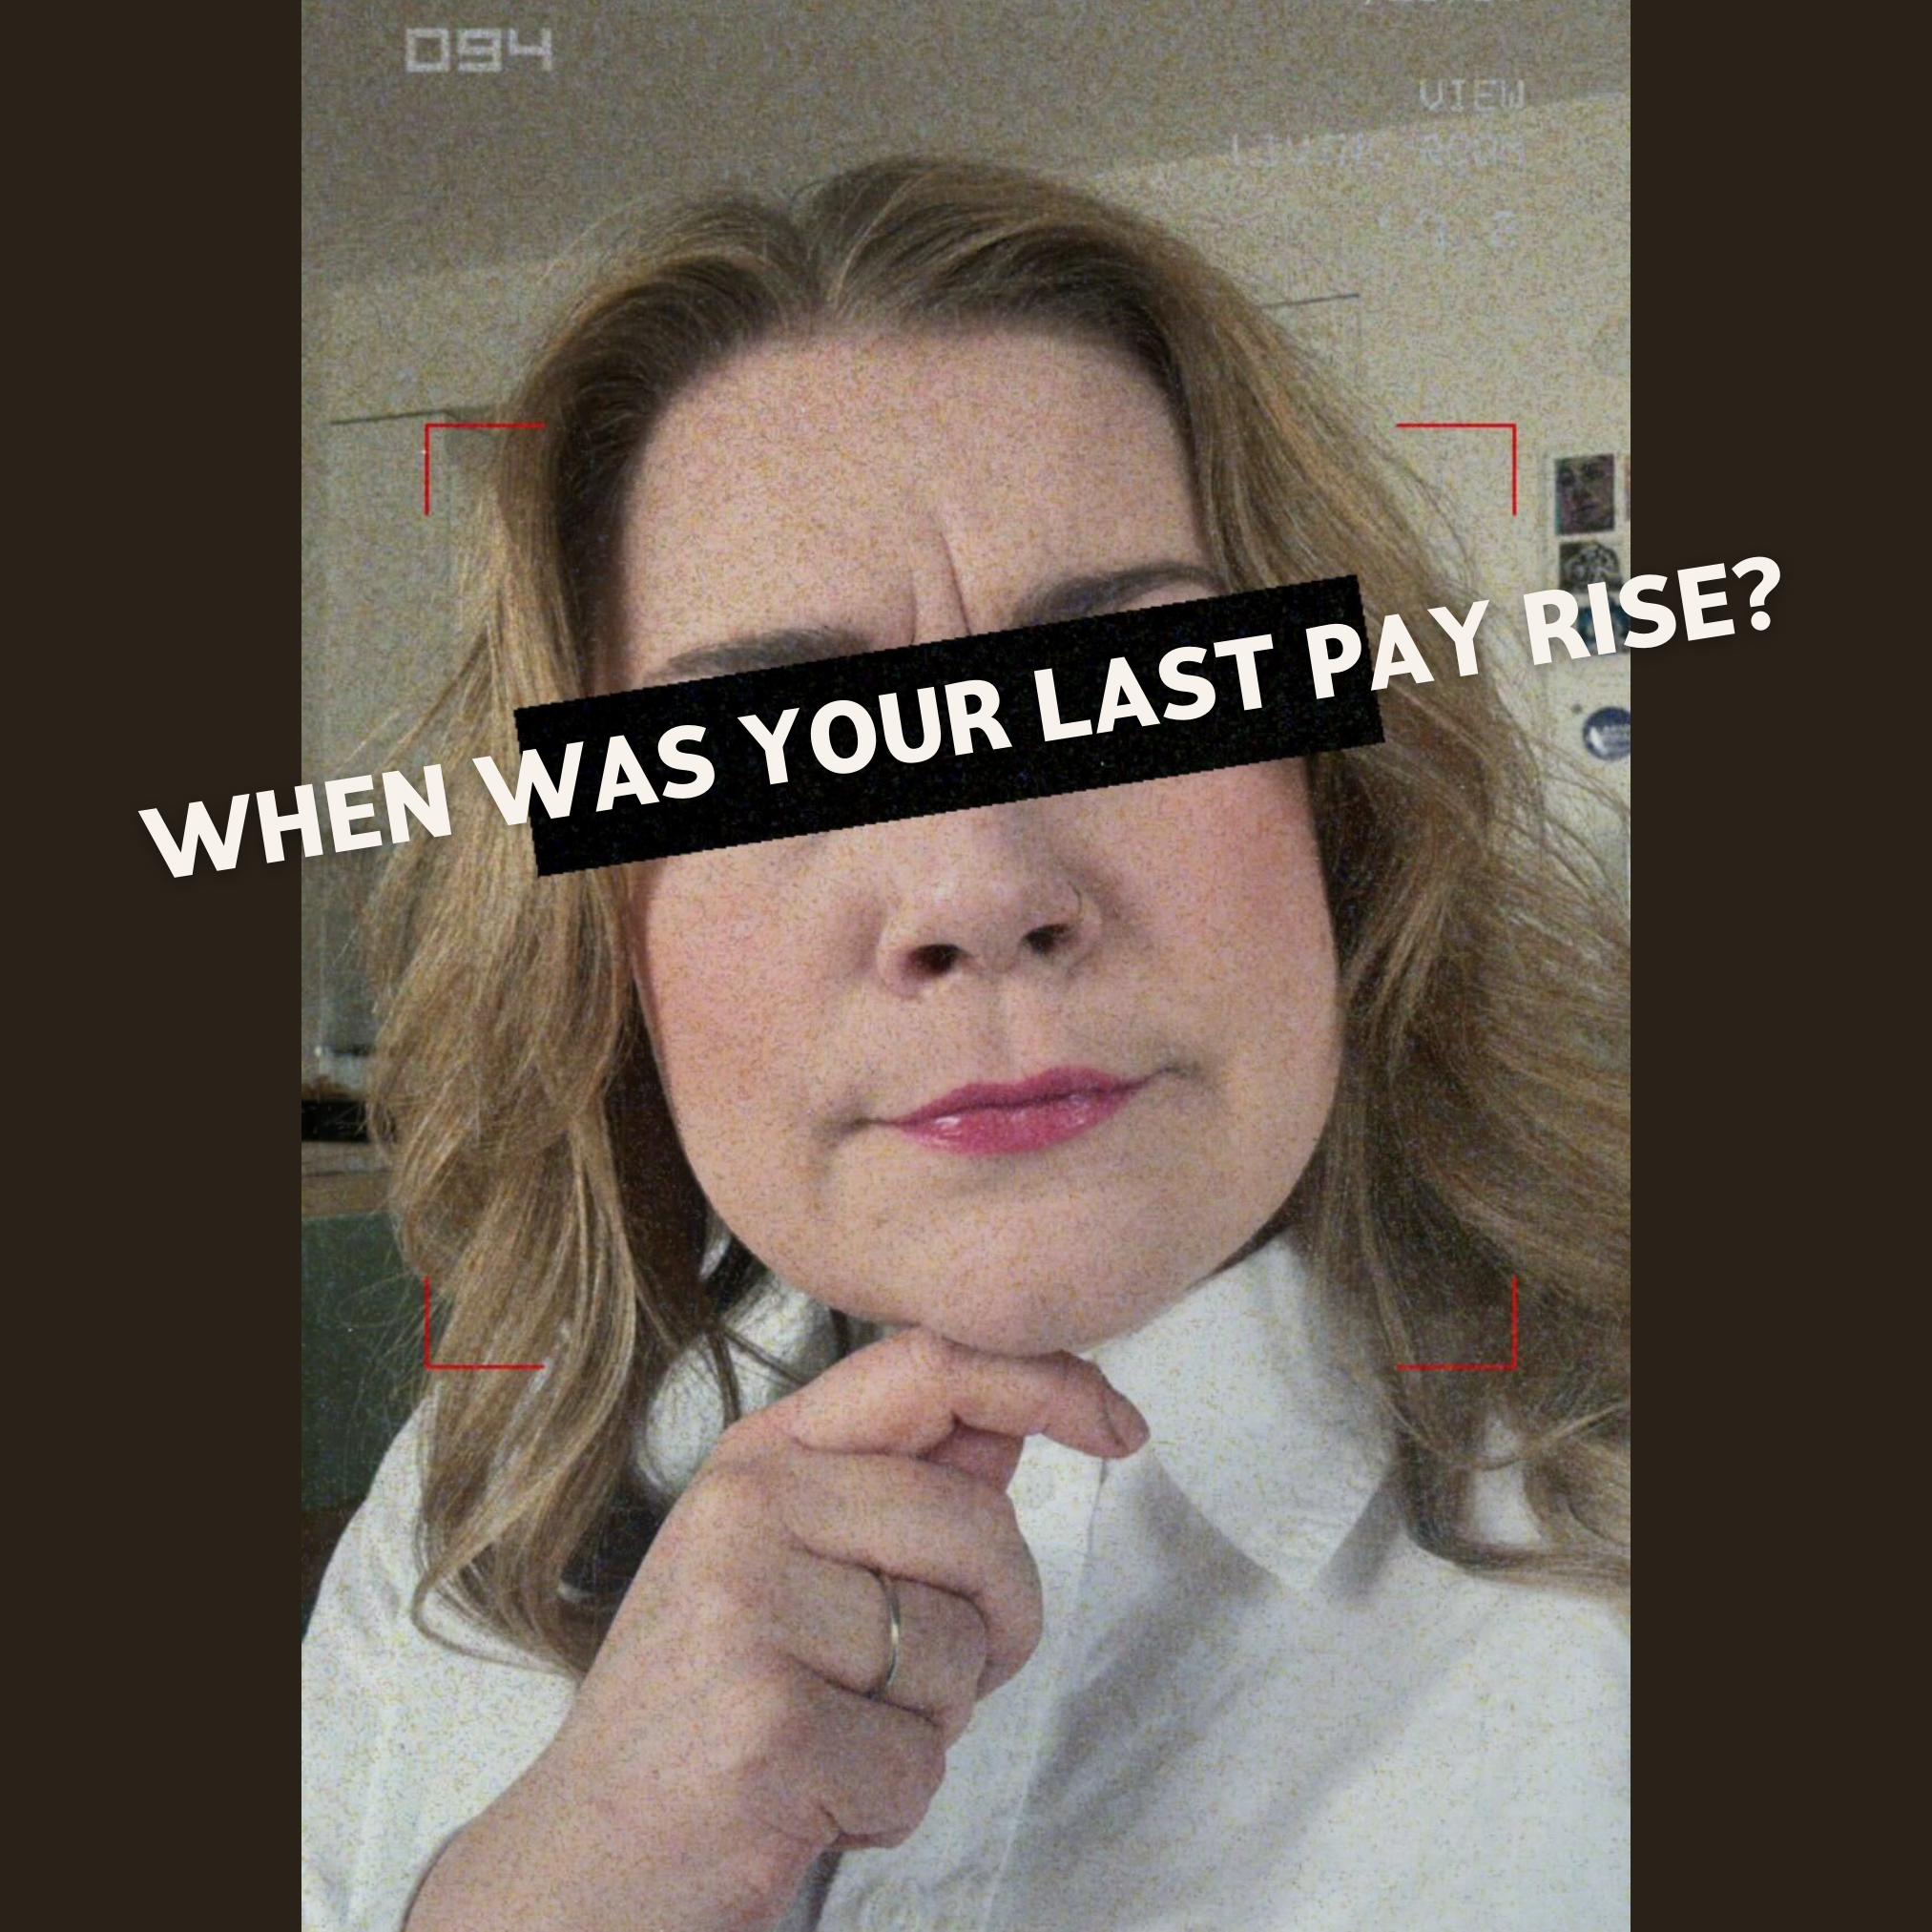 When was your last pay rise?